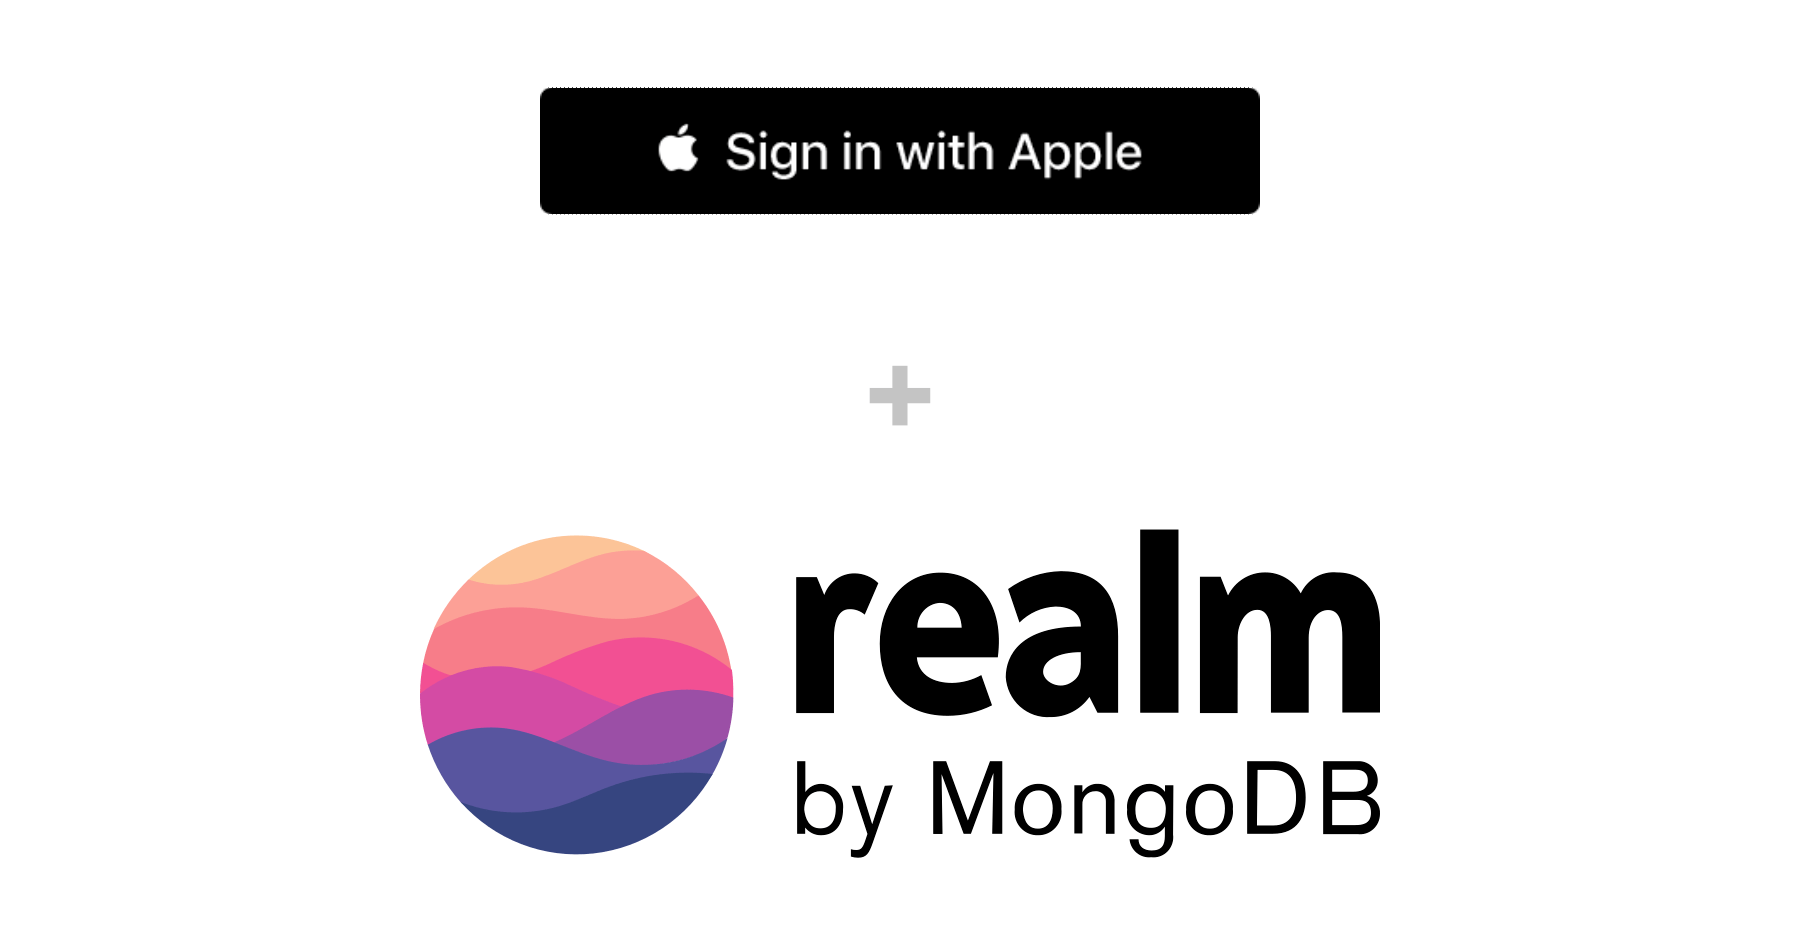 The logos of Sign-in with Apple and realm by MongoDB